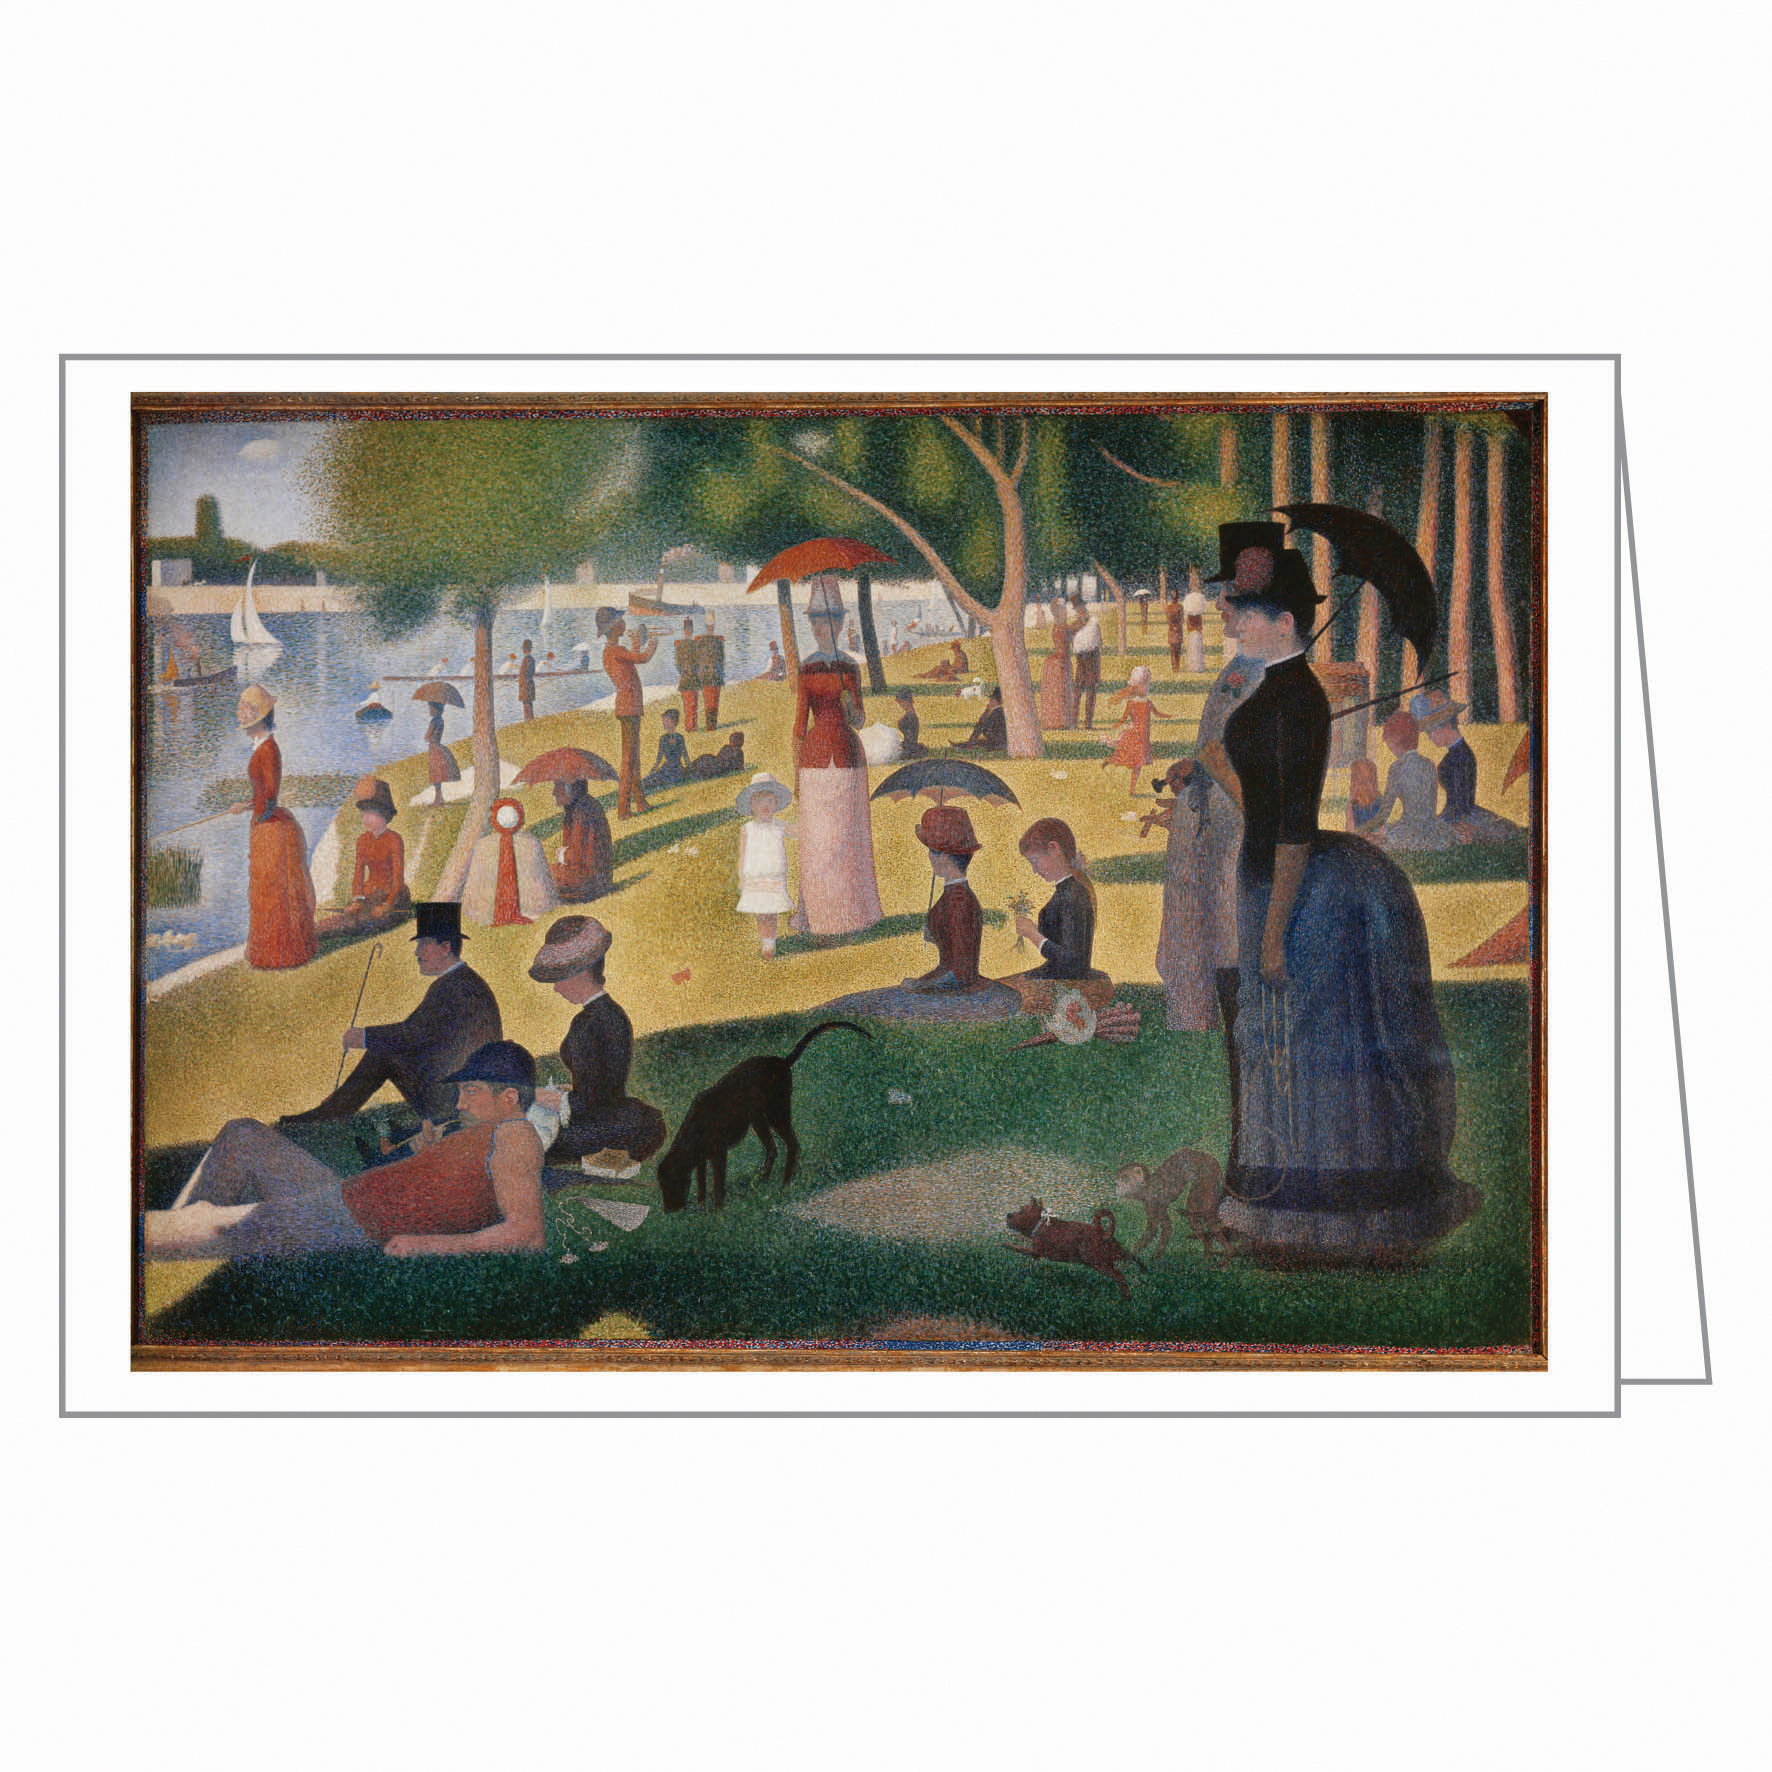 Georges Seurat's landscape painting, 'A Sunday Afternoon on the Island of La Grande Jatte', on notecard box, by teNeues stationery.